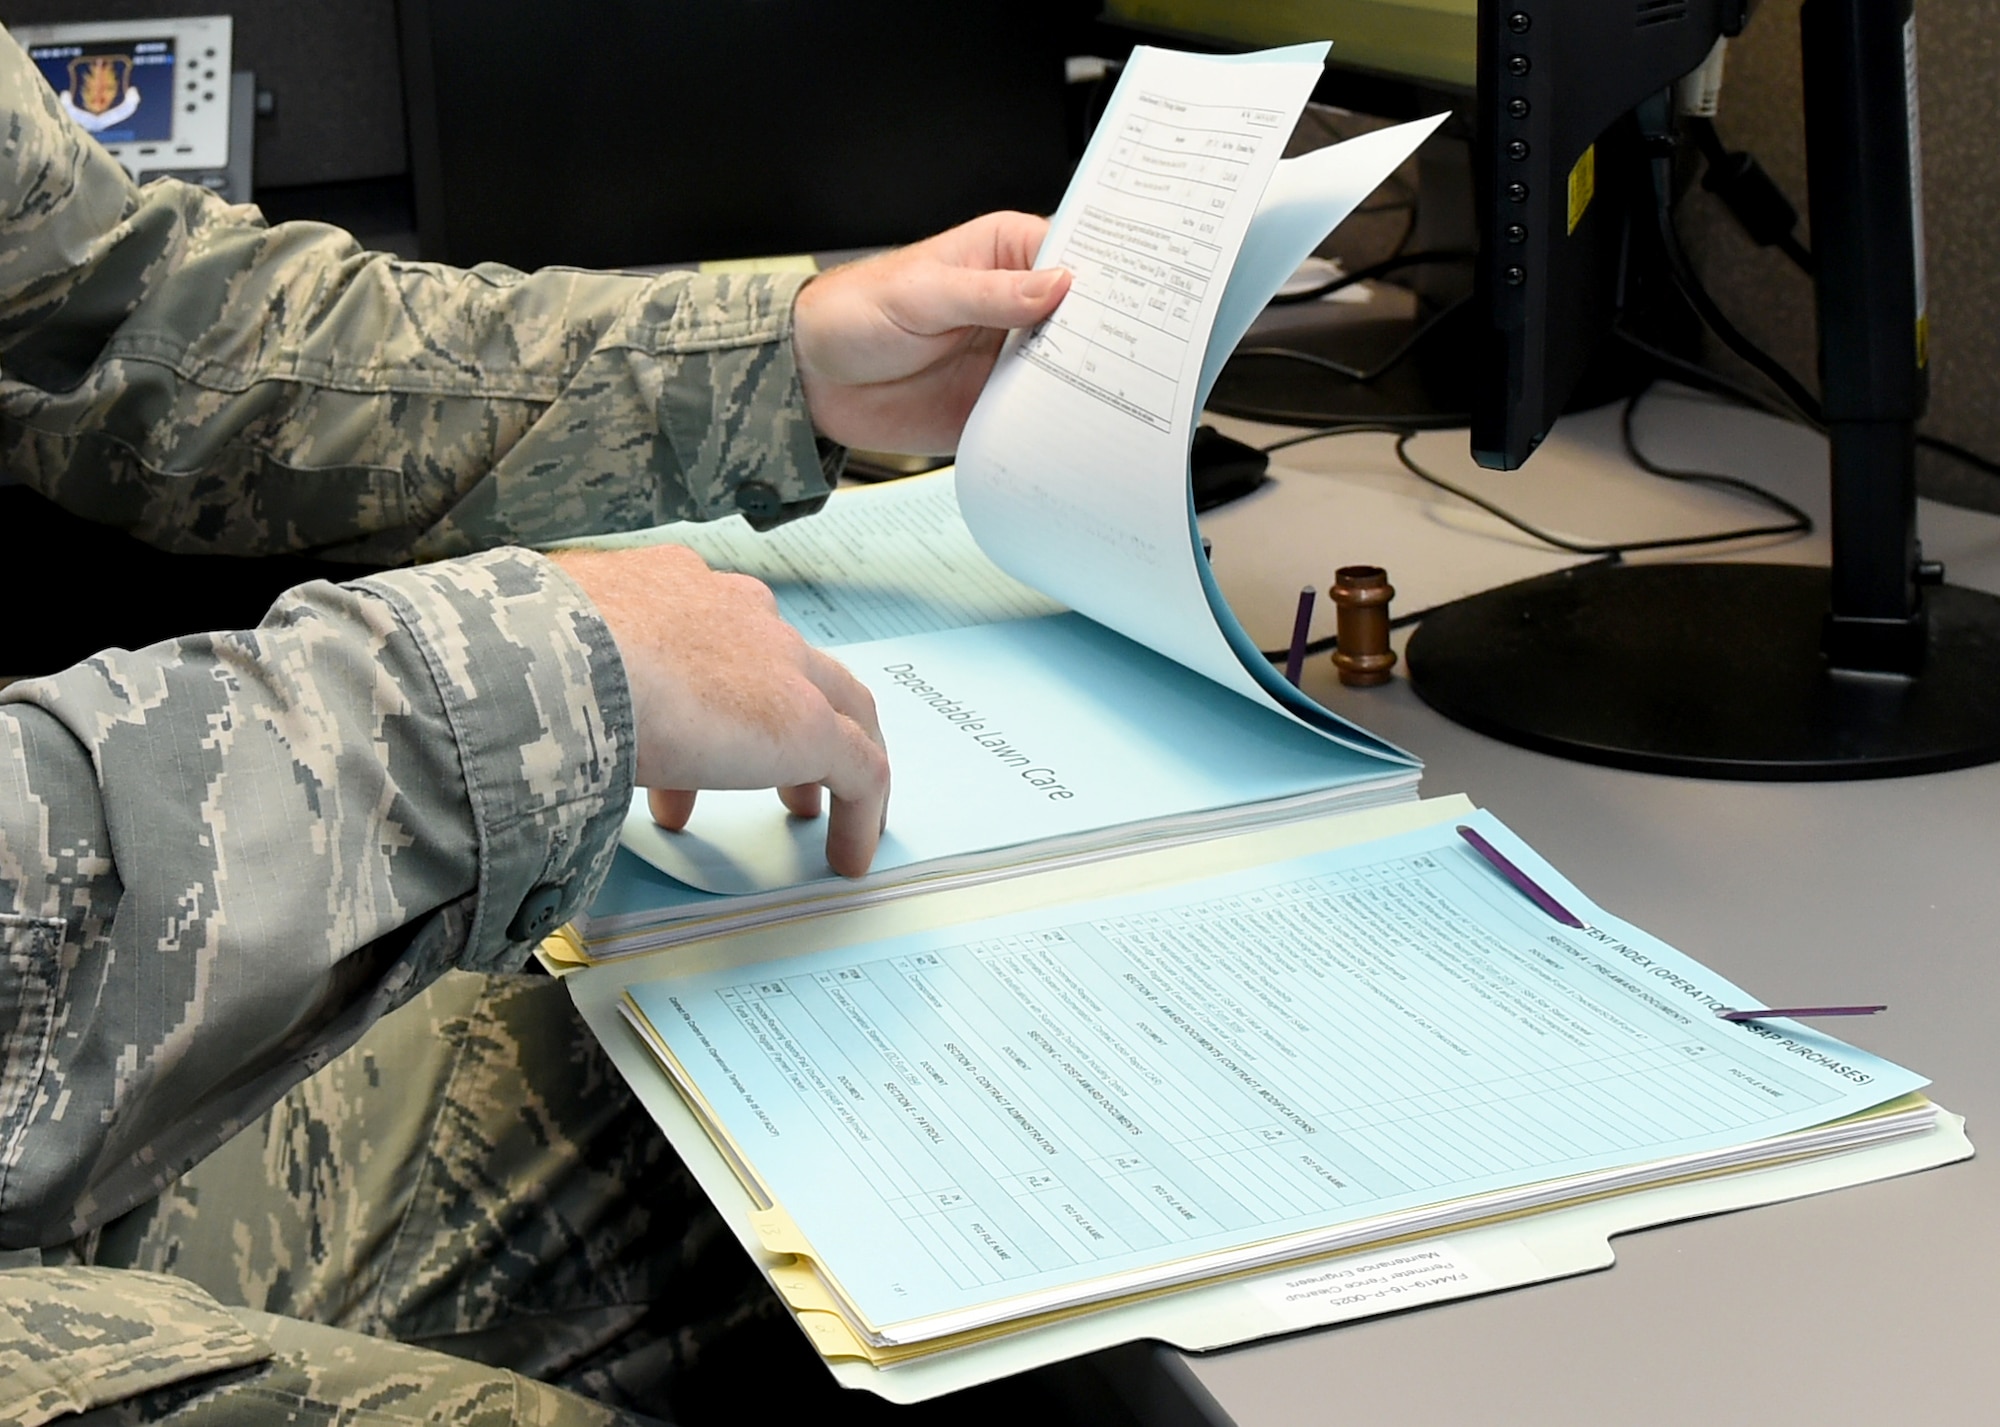 U.S. Air Force Airman 1st Class Jason Easley, 97th Contracting Flight contracting specialist, reads through a contract file, August 17, 2016 at Altus Air Force Base, Okla. The 97th Contracting Flight is responsible for making large military purchases such as equipment and hiring contractors to support Altus’ mission of forging combat mobility forces and deploying Airman warriors. (U.S. Air Force photo by Airman 1st Class Kirby Turbak/Released)